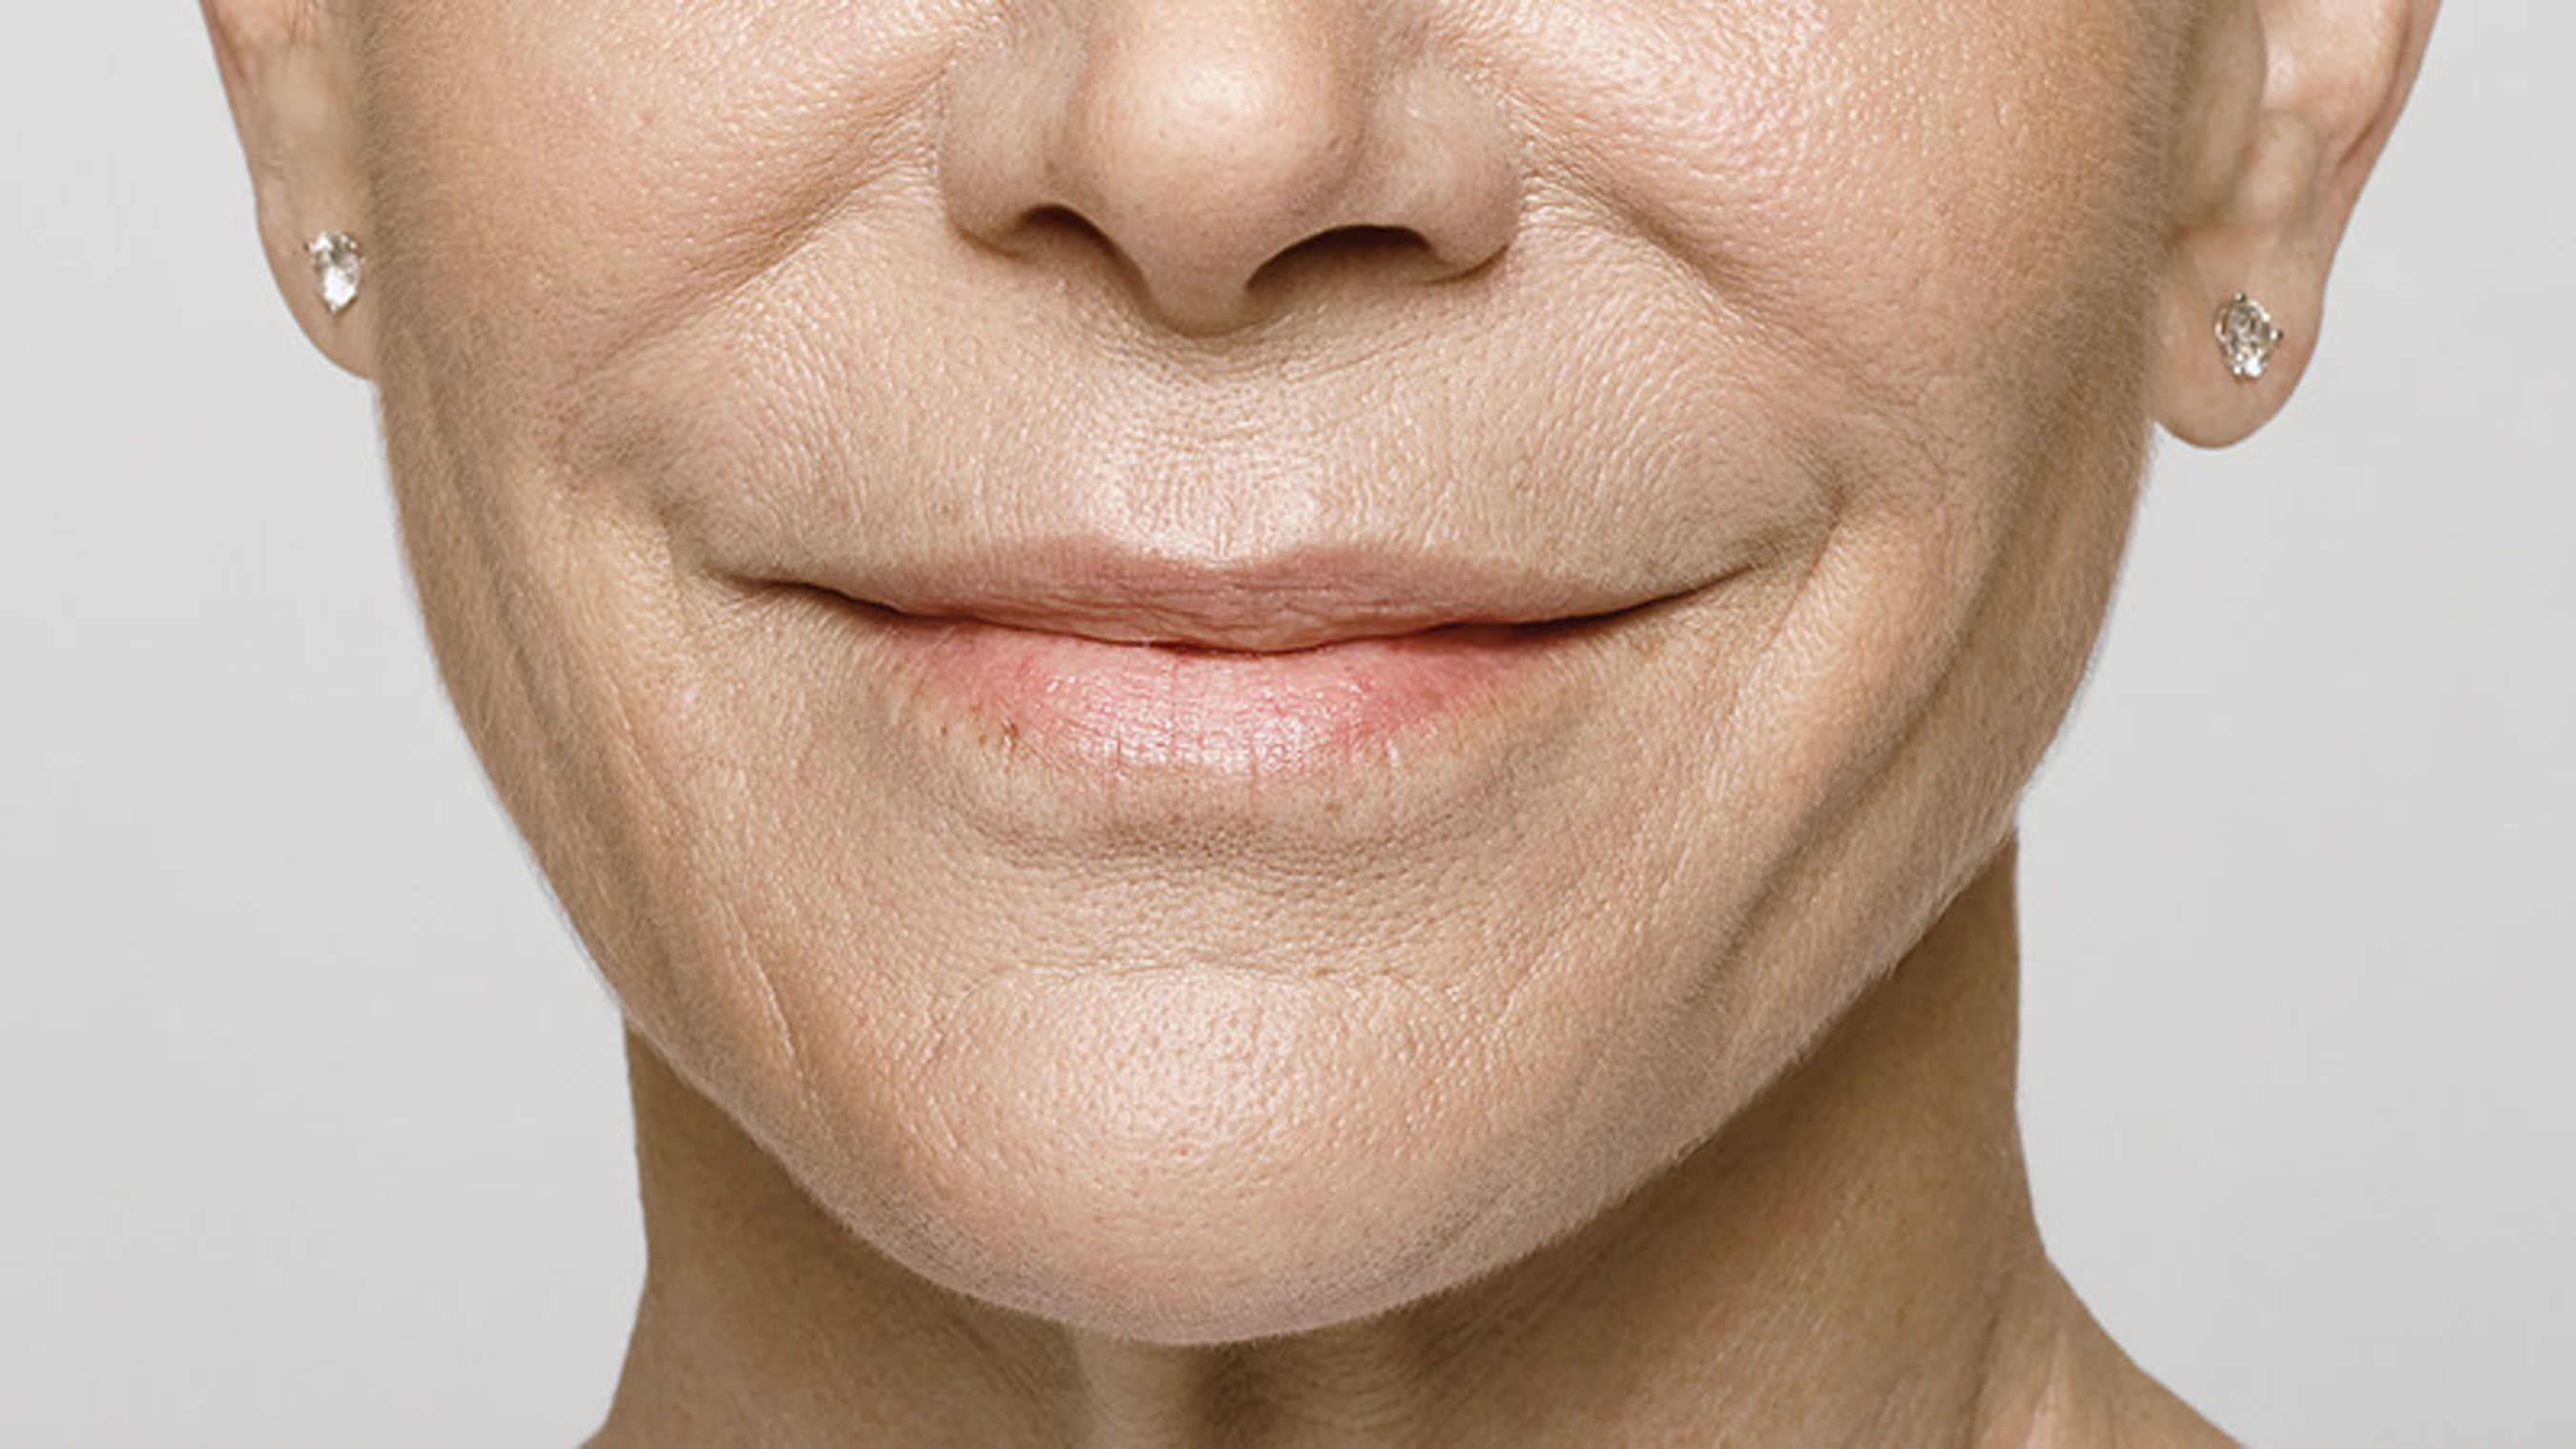 AFTER - 59-year-old patient treated with Restylane(R) Silk and Restylane-L(R). Treatment included: 2.8 ml of Restylane(R) Silk in the lips in perioral lines and 1ml of Restylane-L(R) in the nasolabial folds.